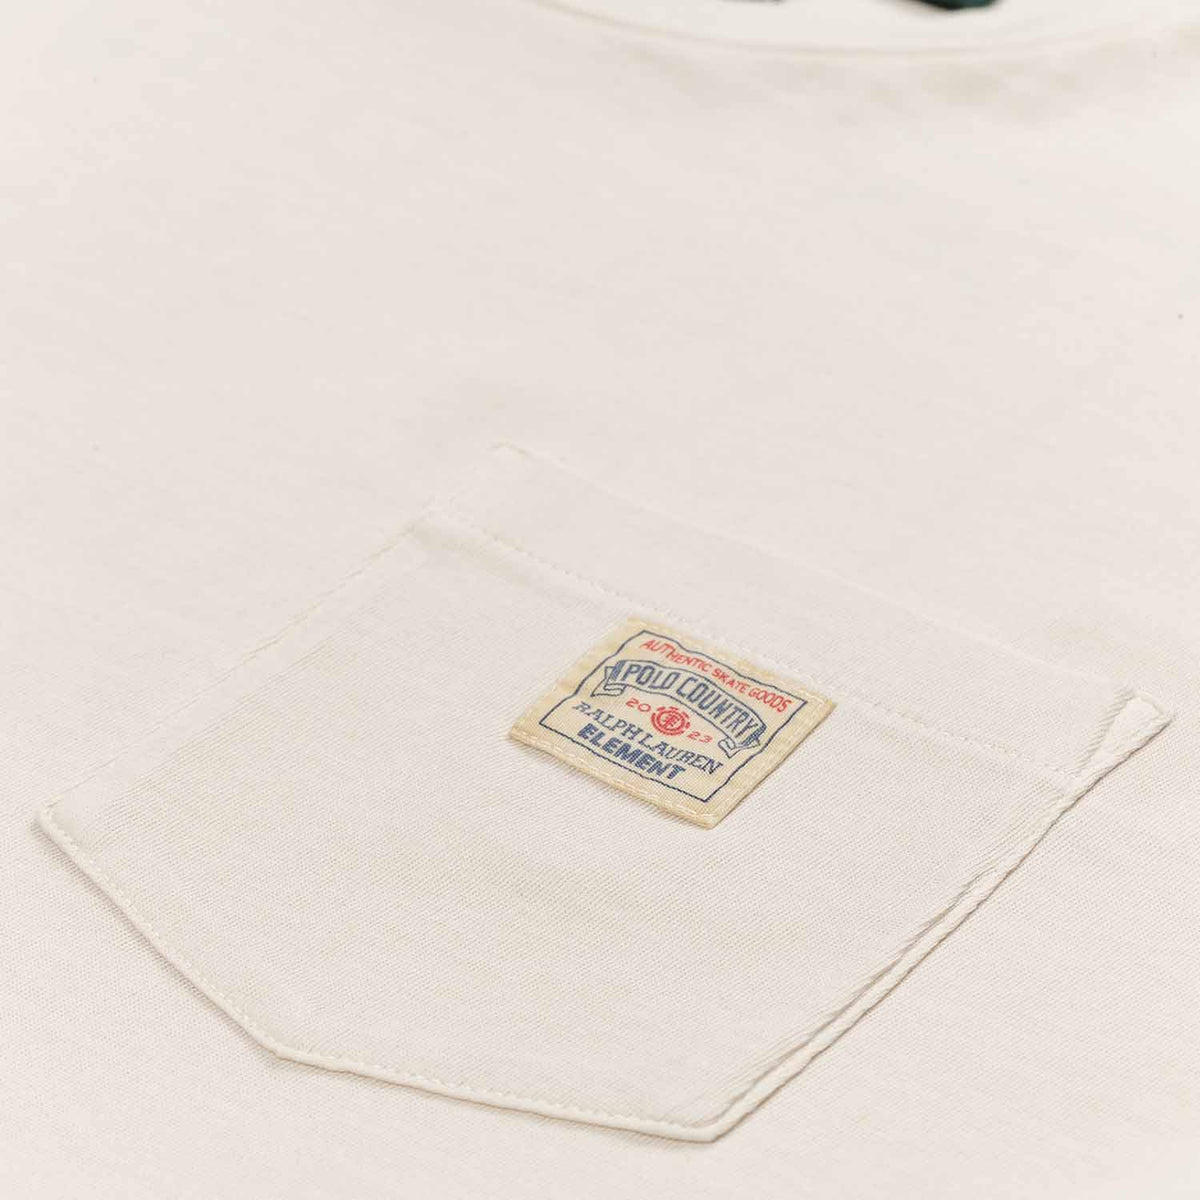 Polo Ralph Lauren x Element Pocket Tee in cream. Small front pocket on left breast with small square sewn on patch. Close up photo of Polo Ralph Lauren x Element logo on patch in red and blue.